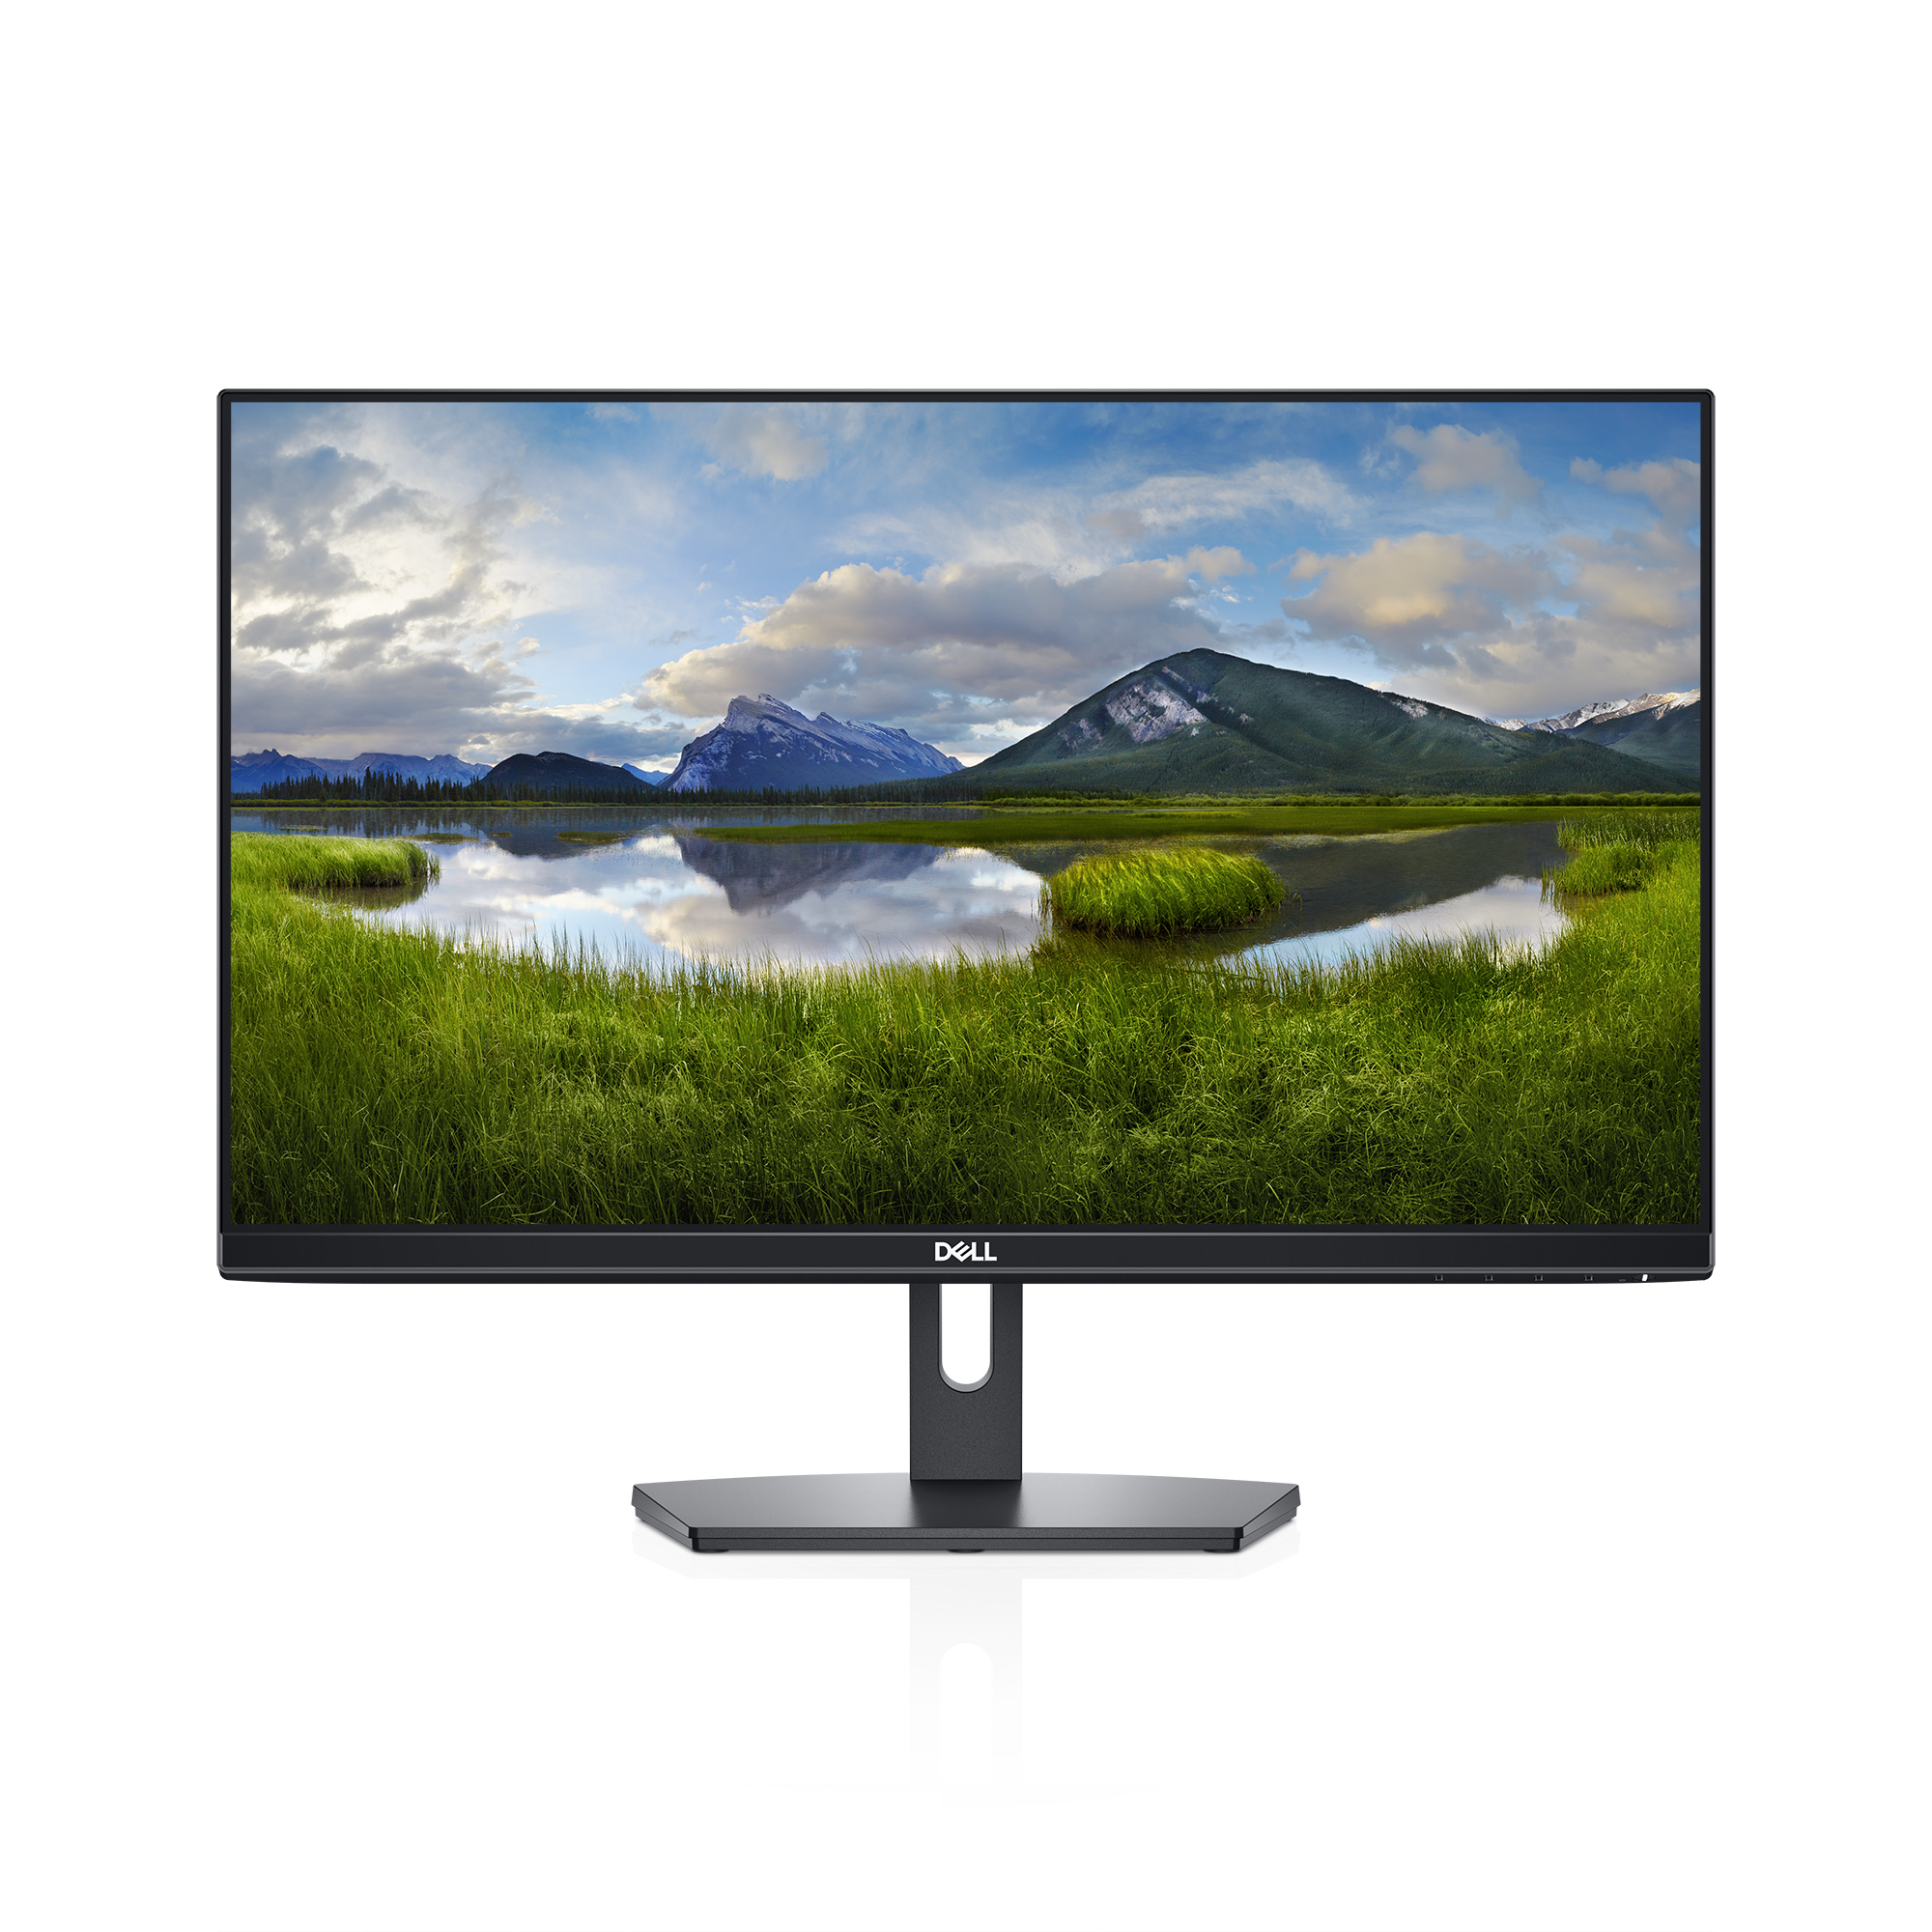 Dell SE2419H 24" IPS 1920x1080 HDMI VGA 60hz 5ms HD LED Monitor- 1 Year Advanced Exchange Warranty - image 1 of 7